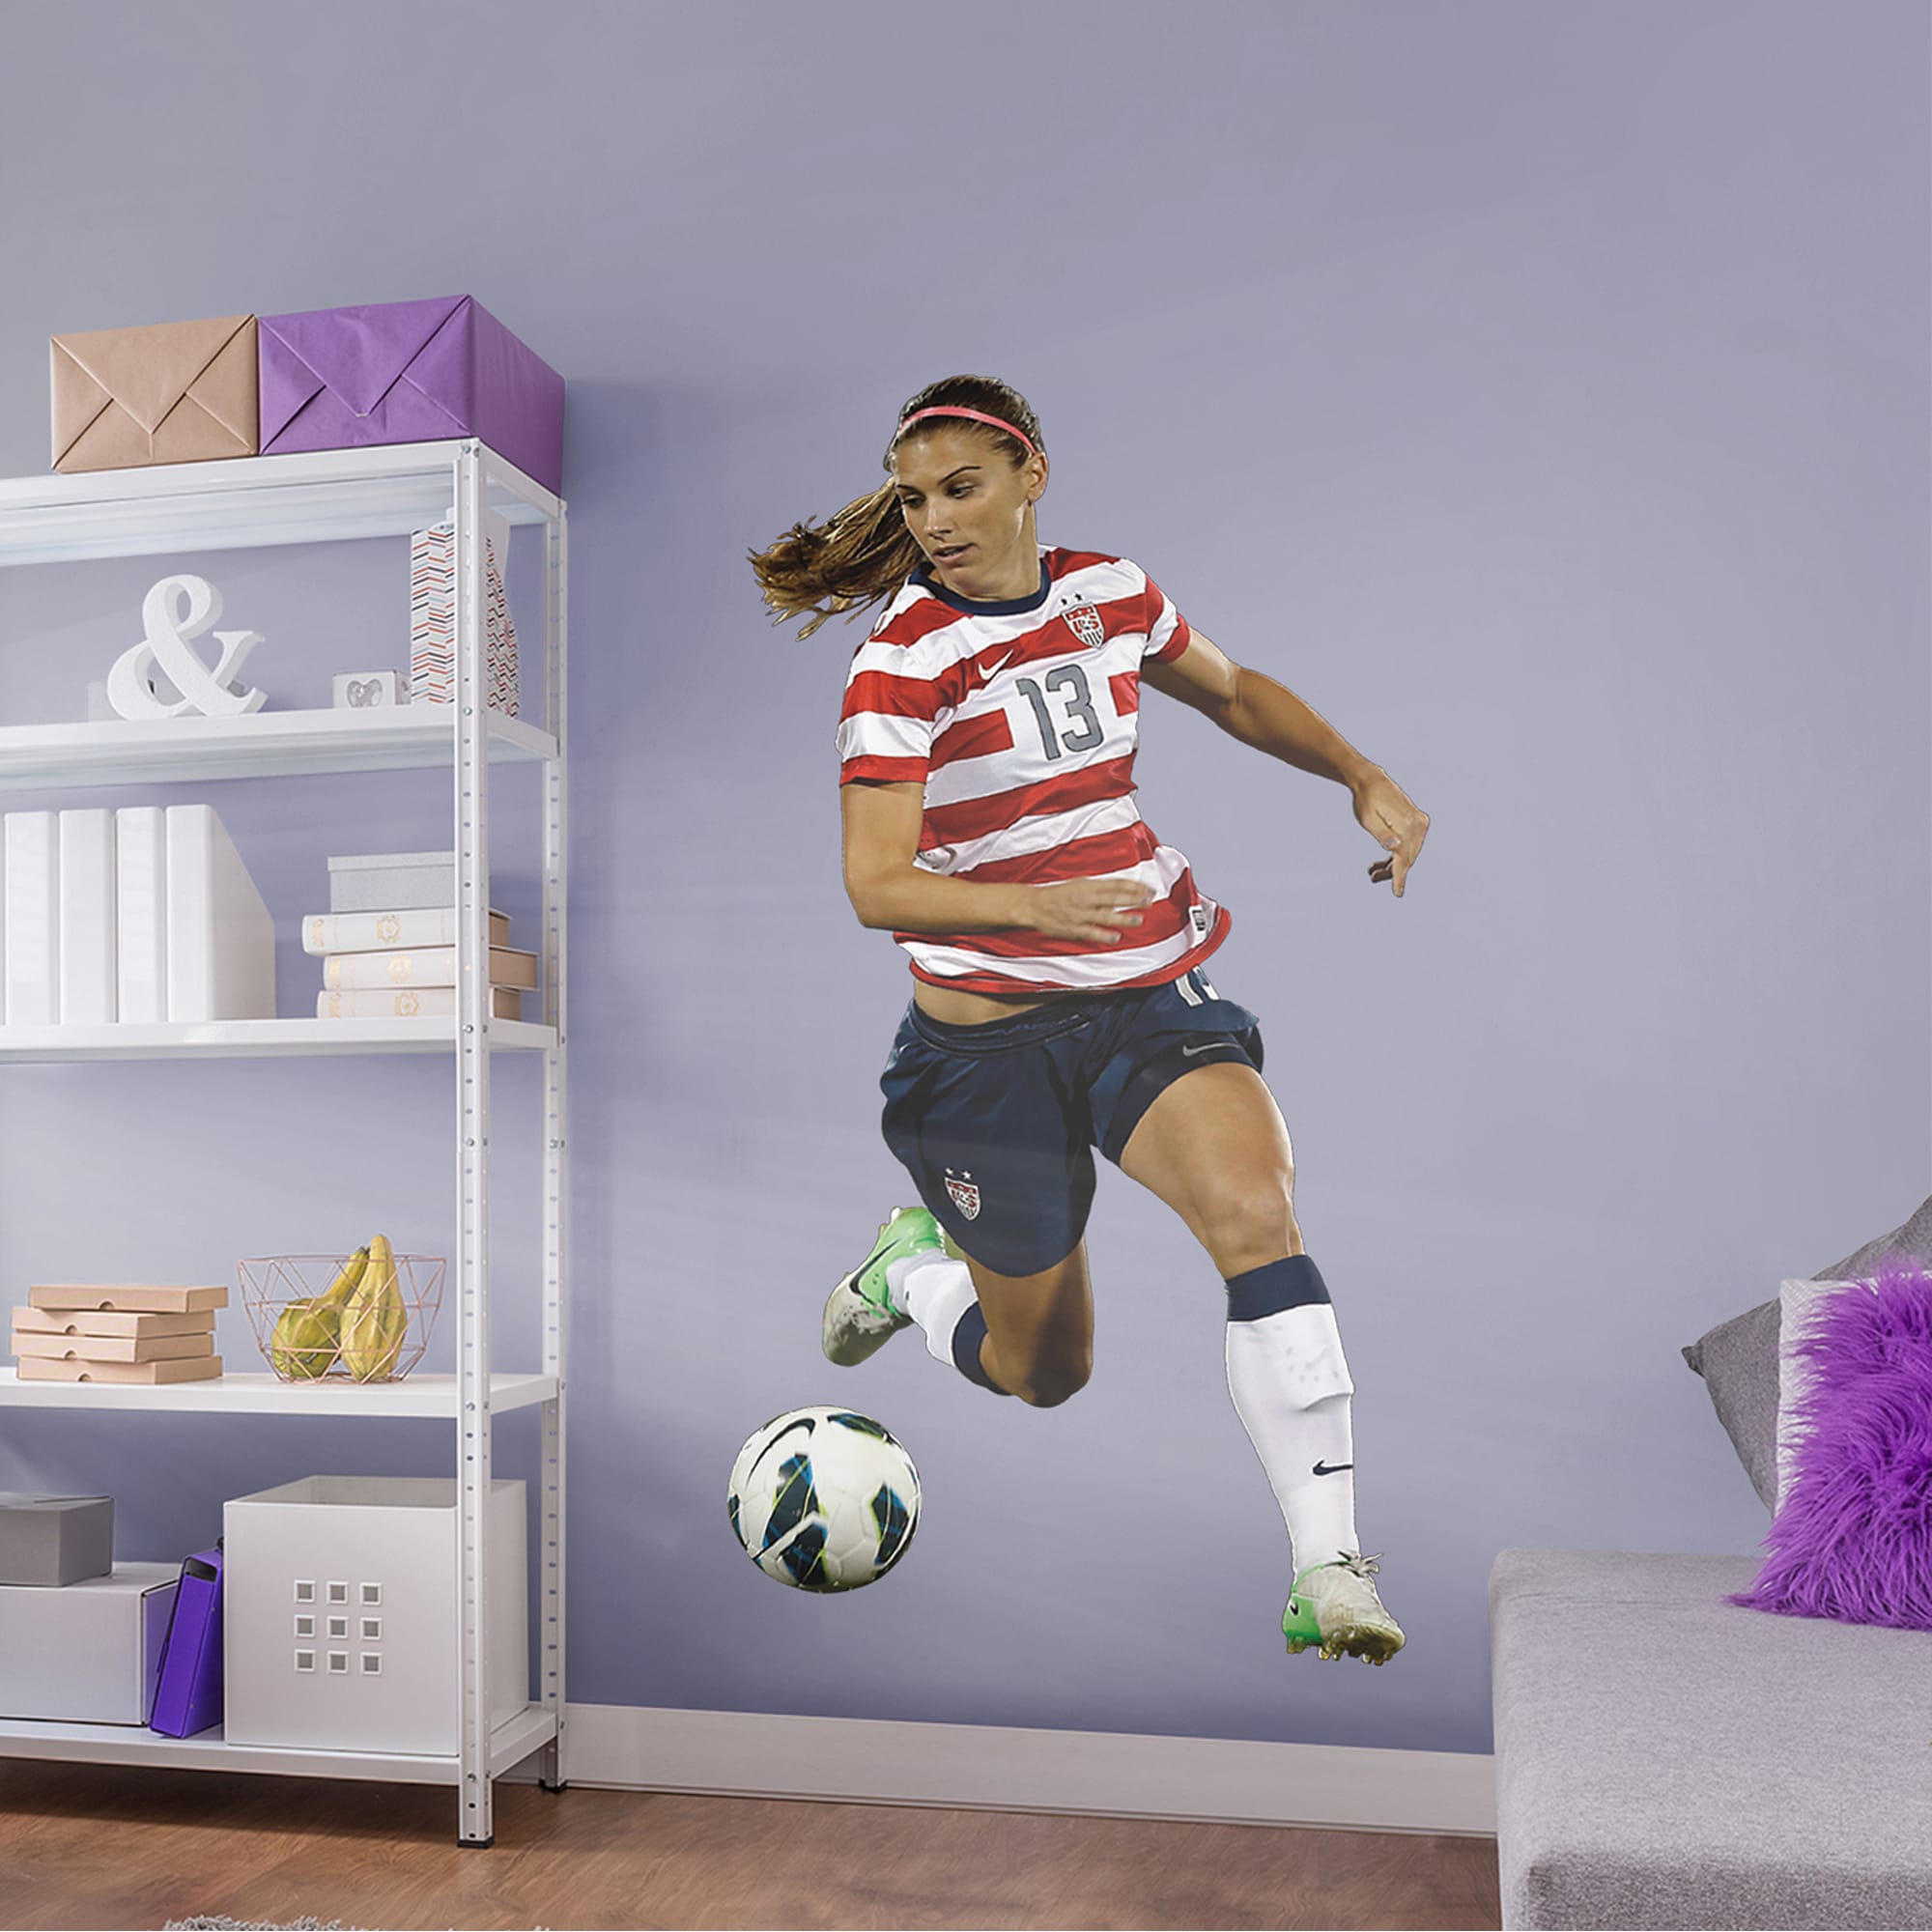 Alex Morgan for USWNT, Women in Sports: Ball Control - Officially Licensed Removable Wall Decal by Fathead | Vinyl